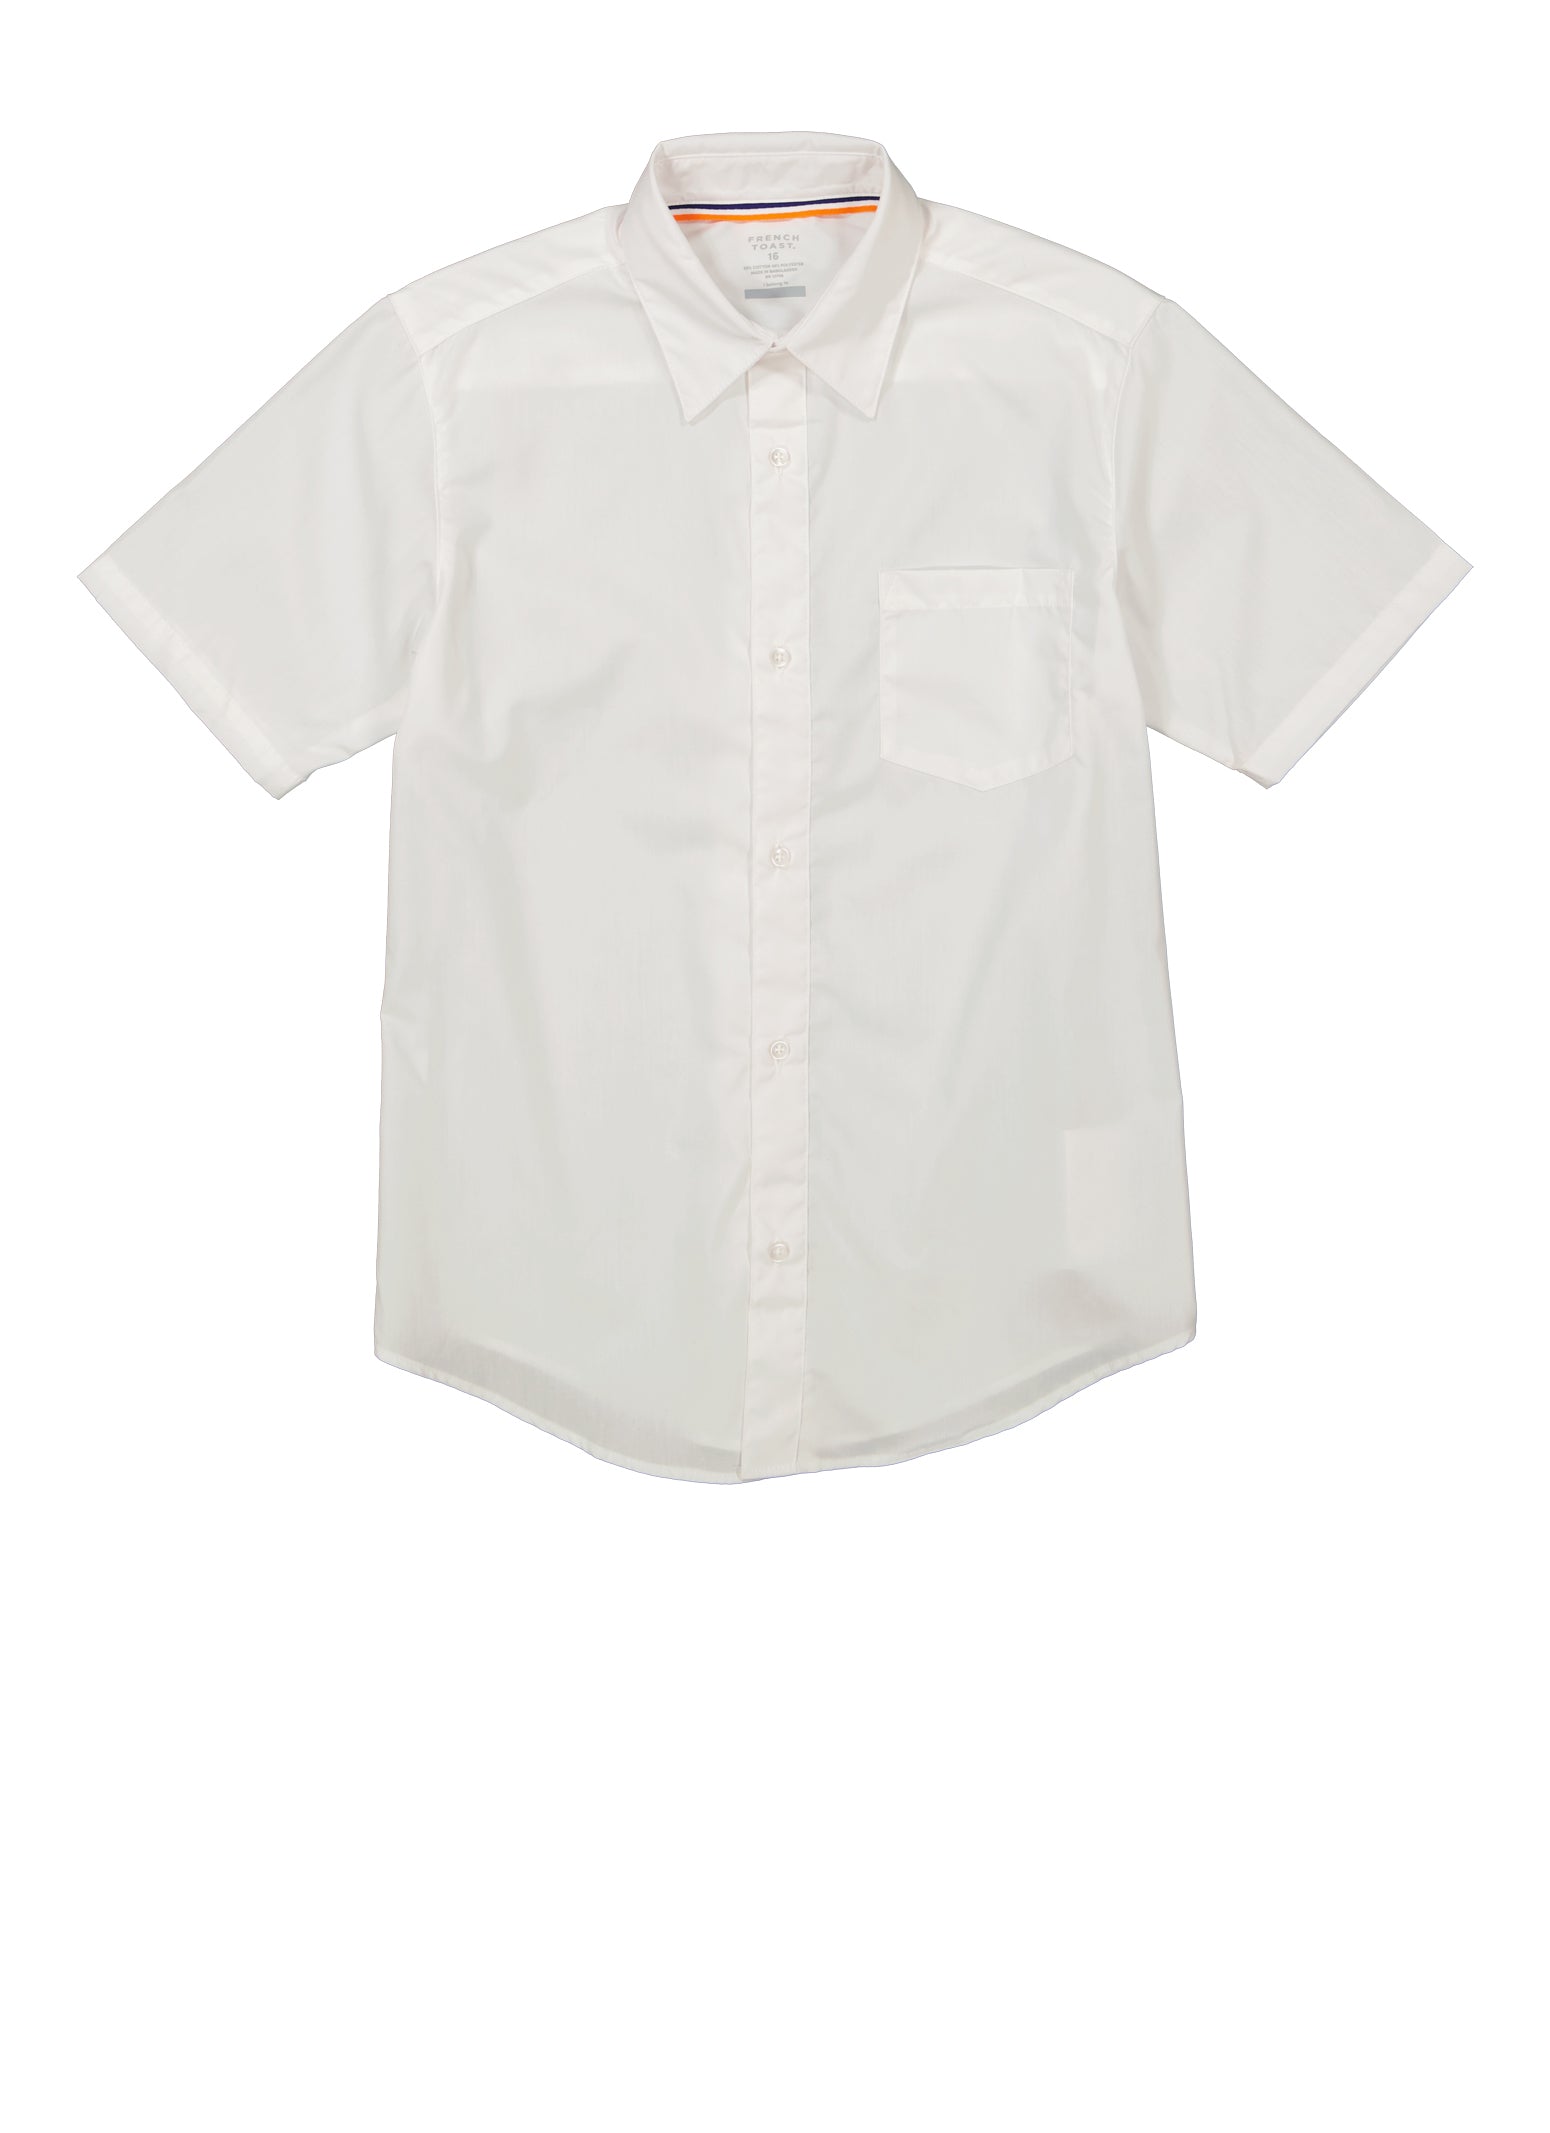 French Toast Boys 16-20 Short Sleeve Button Front Shirt, White, Size 16